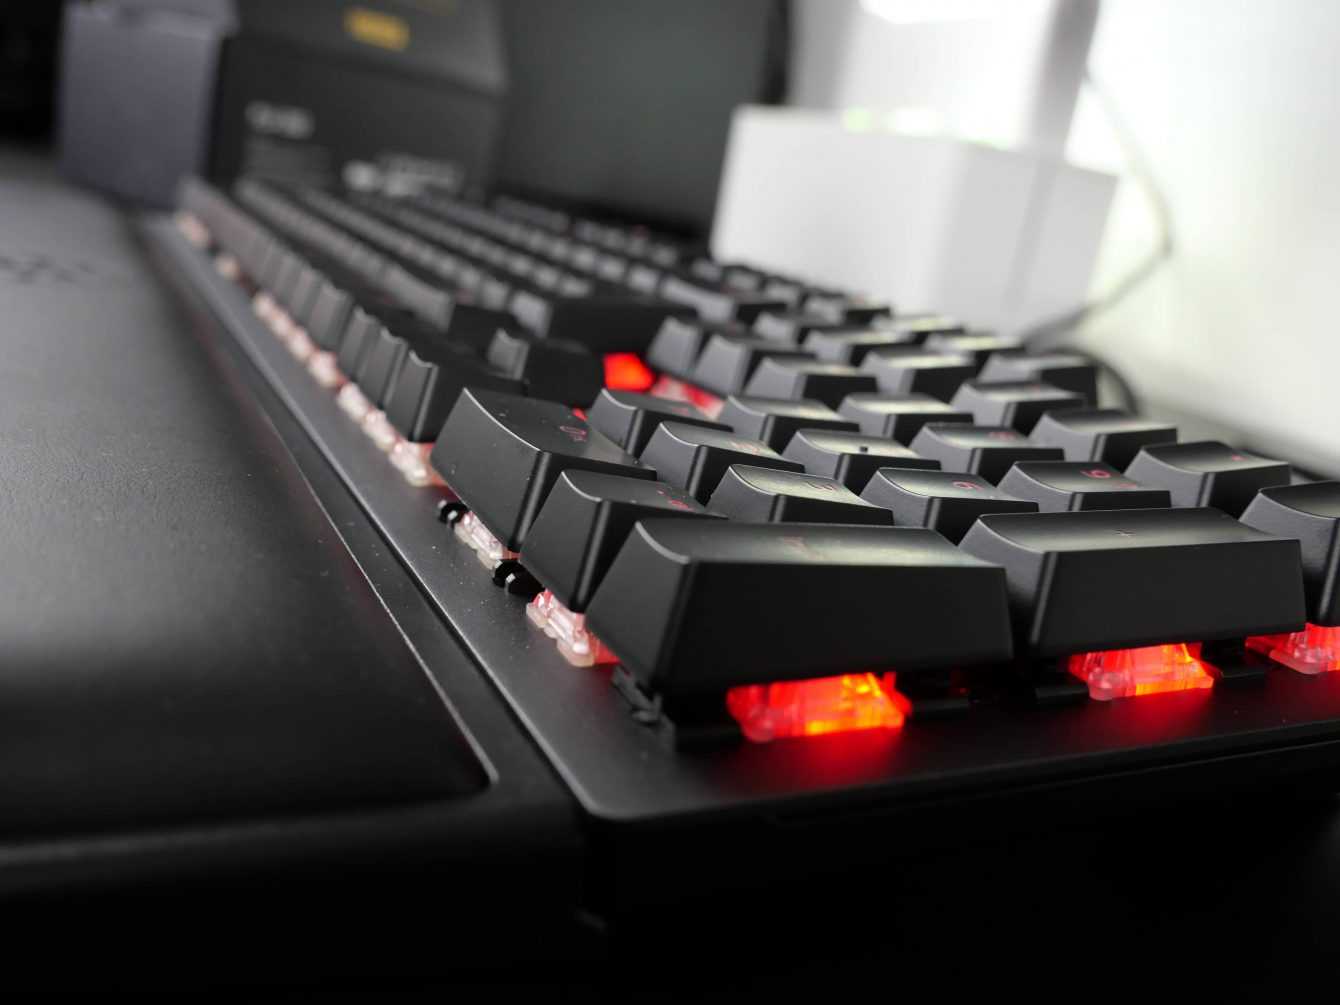 XPG SUMMONER review: the keyboard you don't expect